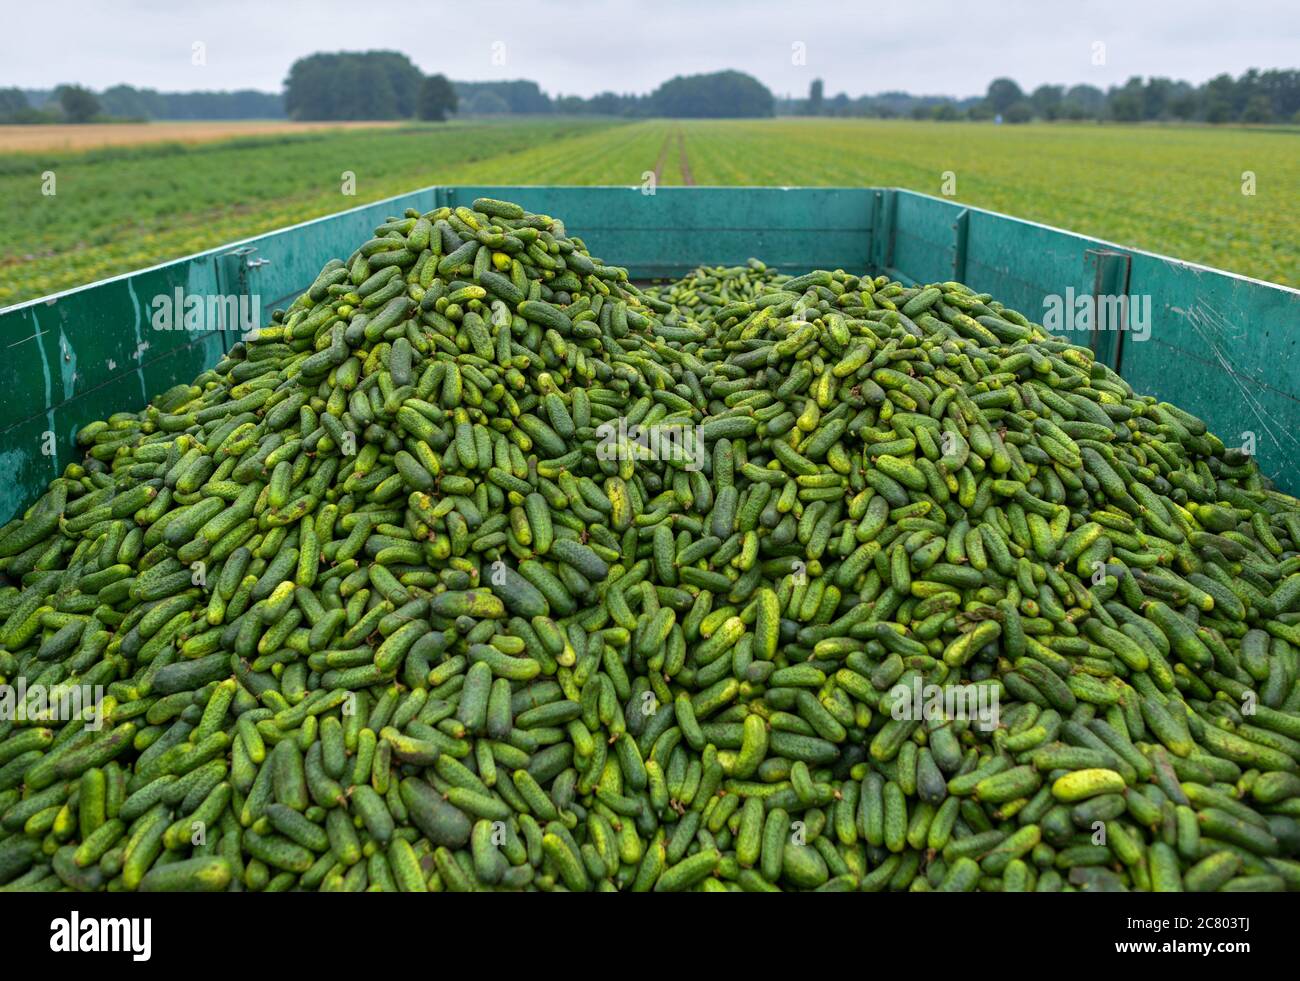 16 July 2020, Brandenburg, Kasel-Golzig: A trailer full of pickled gherkins is parked in a field belonging to Knösels Gemüse-Erzeugungs GmbH & Co. KG. The harvest of the Spreewald gherkin is currently running at full speed. In the Spreewald there is a multitude of large and small companies that cultivate and also process pickled gherkins. Since 1995 Knösels Gemüse-Erzeugungs GmbH & Co. KG has been growing pickled gherkins, red cabbage, pumpkin, zucchini as well as corn and cereals. In the harvesting season, the company employs around 400 seasonal workers from abroad. Photo: Patrick Pleul/dpa-Z Stock Photo